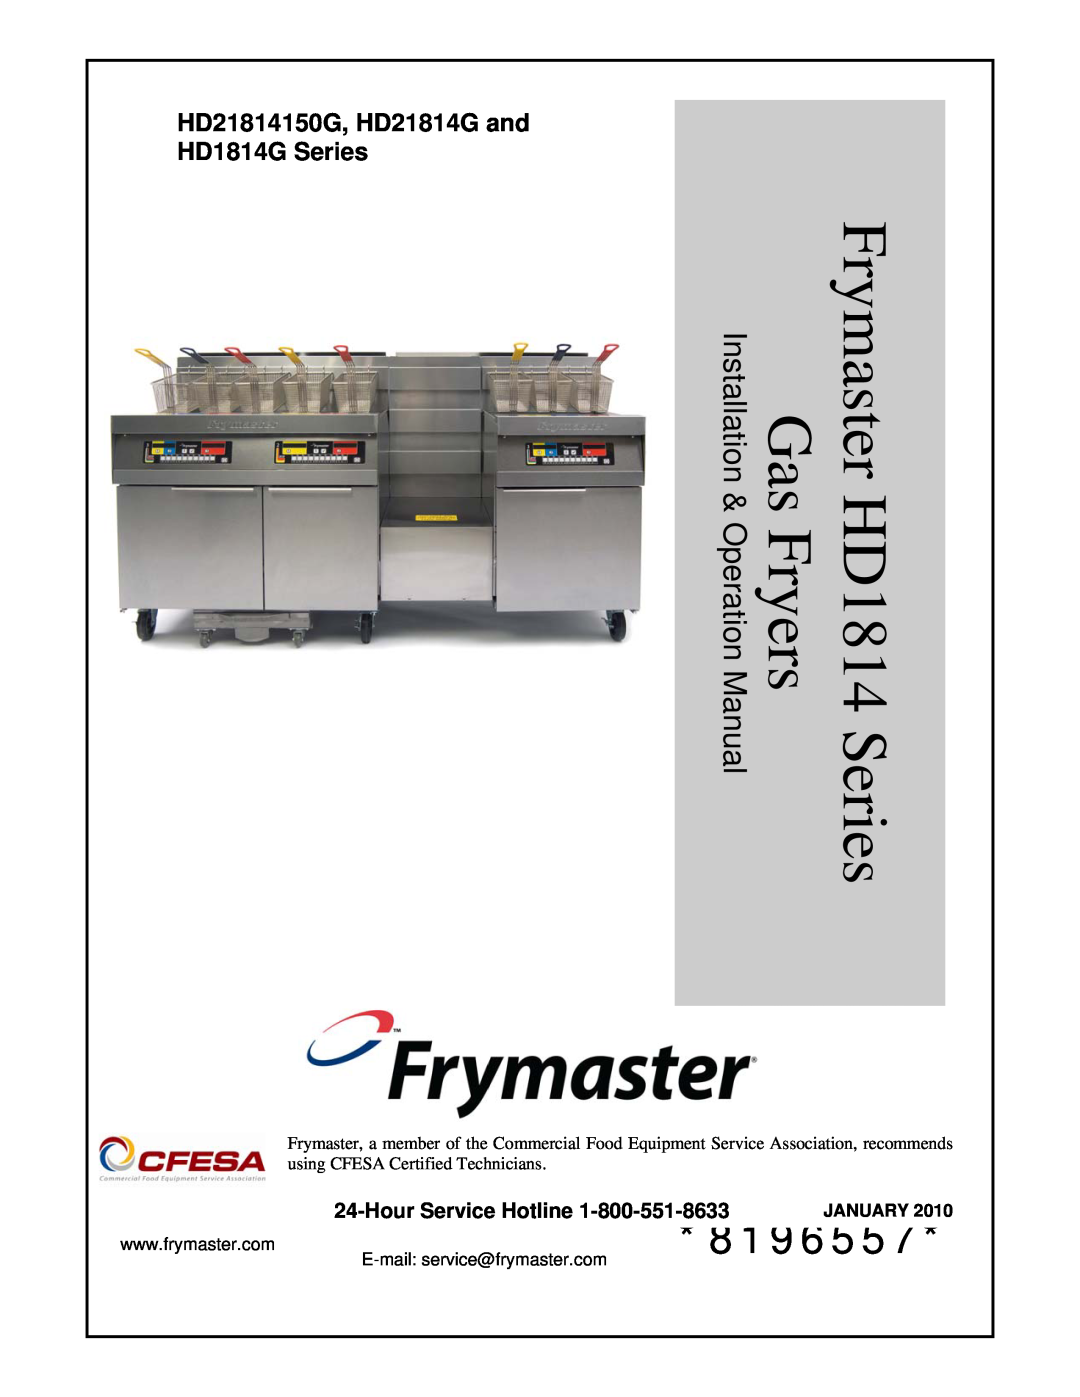 Frymaster operation manual HD21814150G, HD21814G and HD1814G Series, Hour Service Hotline, 8196557, January, Gas Fryers 